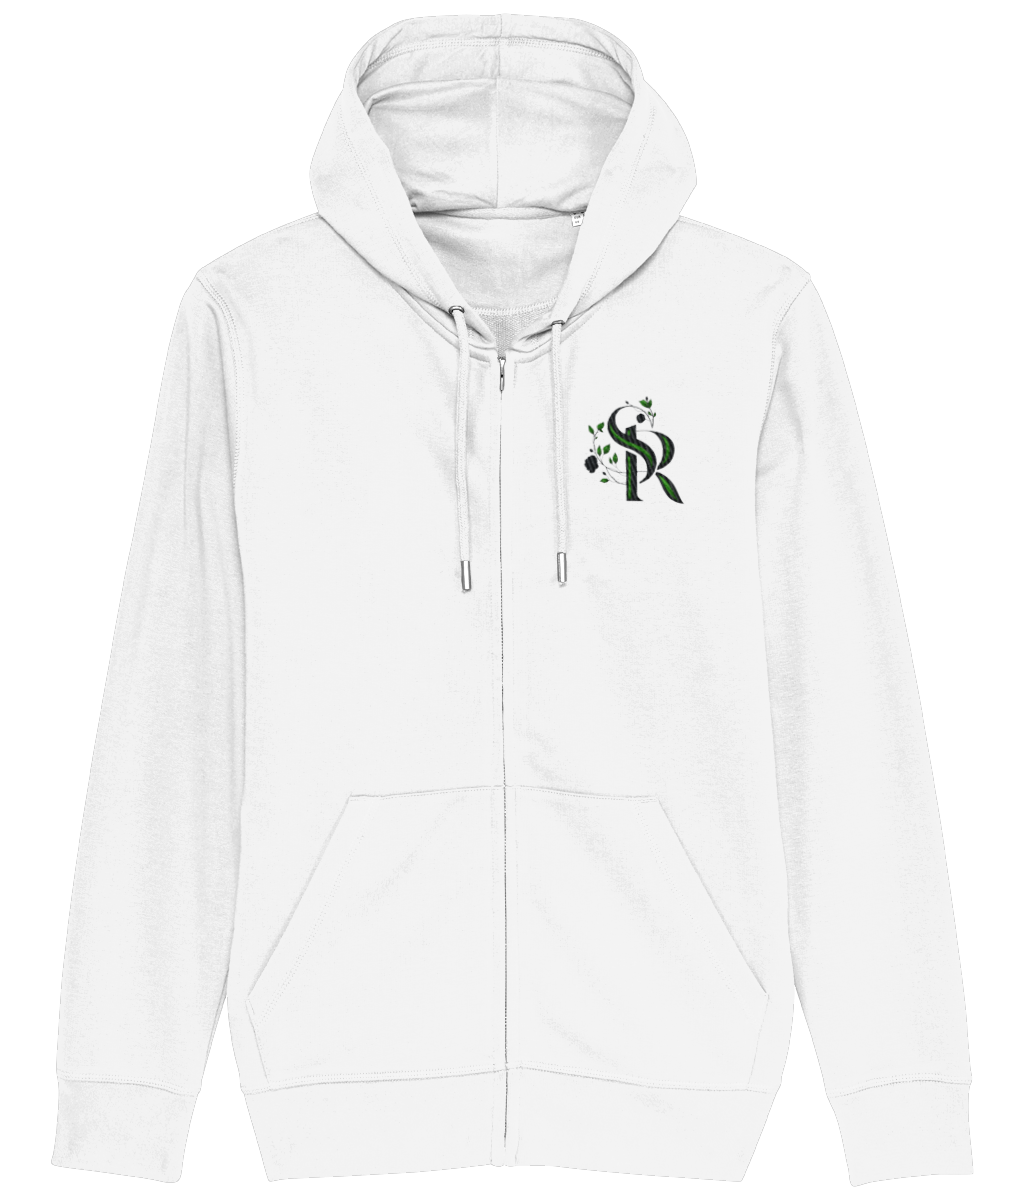 September Rose Embroidered Connector Zip Hoodie